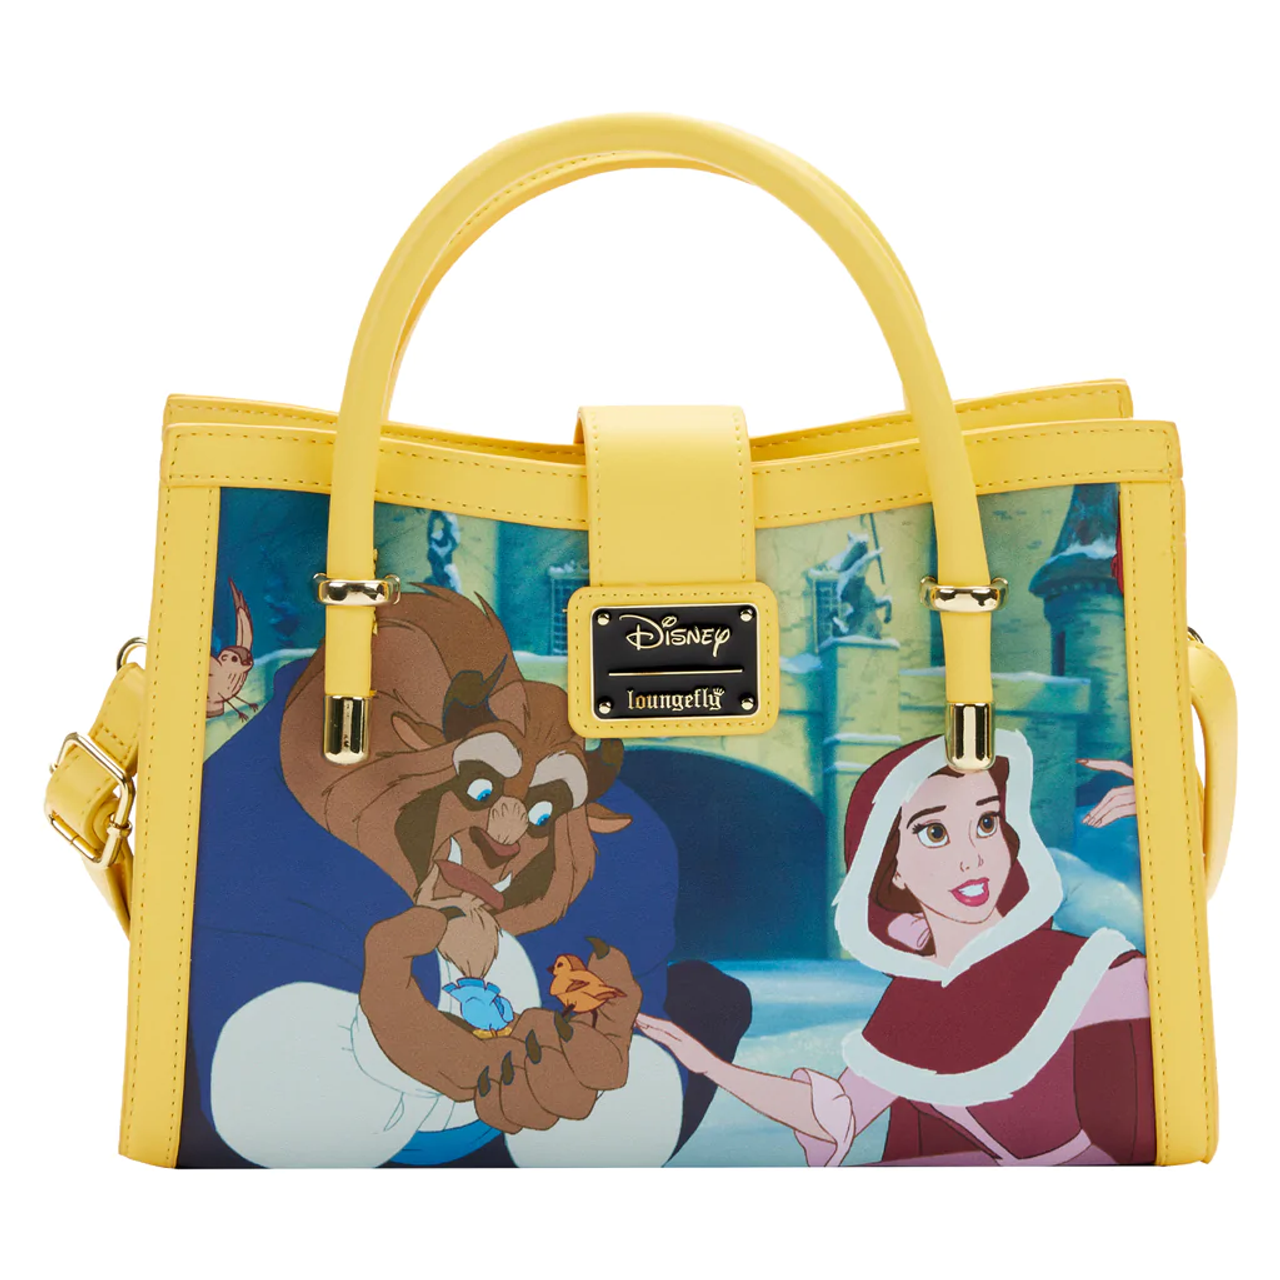 Loungefly Disney Beauty And The Beast Belle Rose Satchel Bag New | eBay